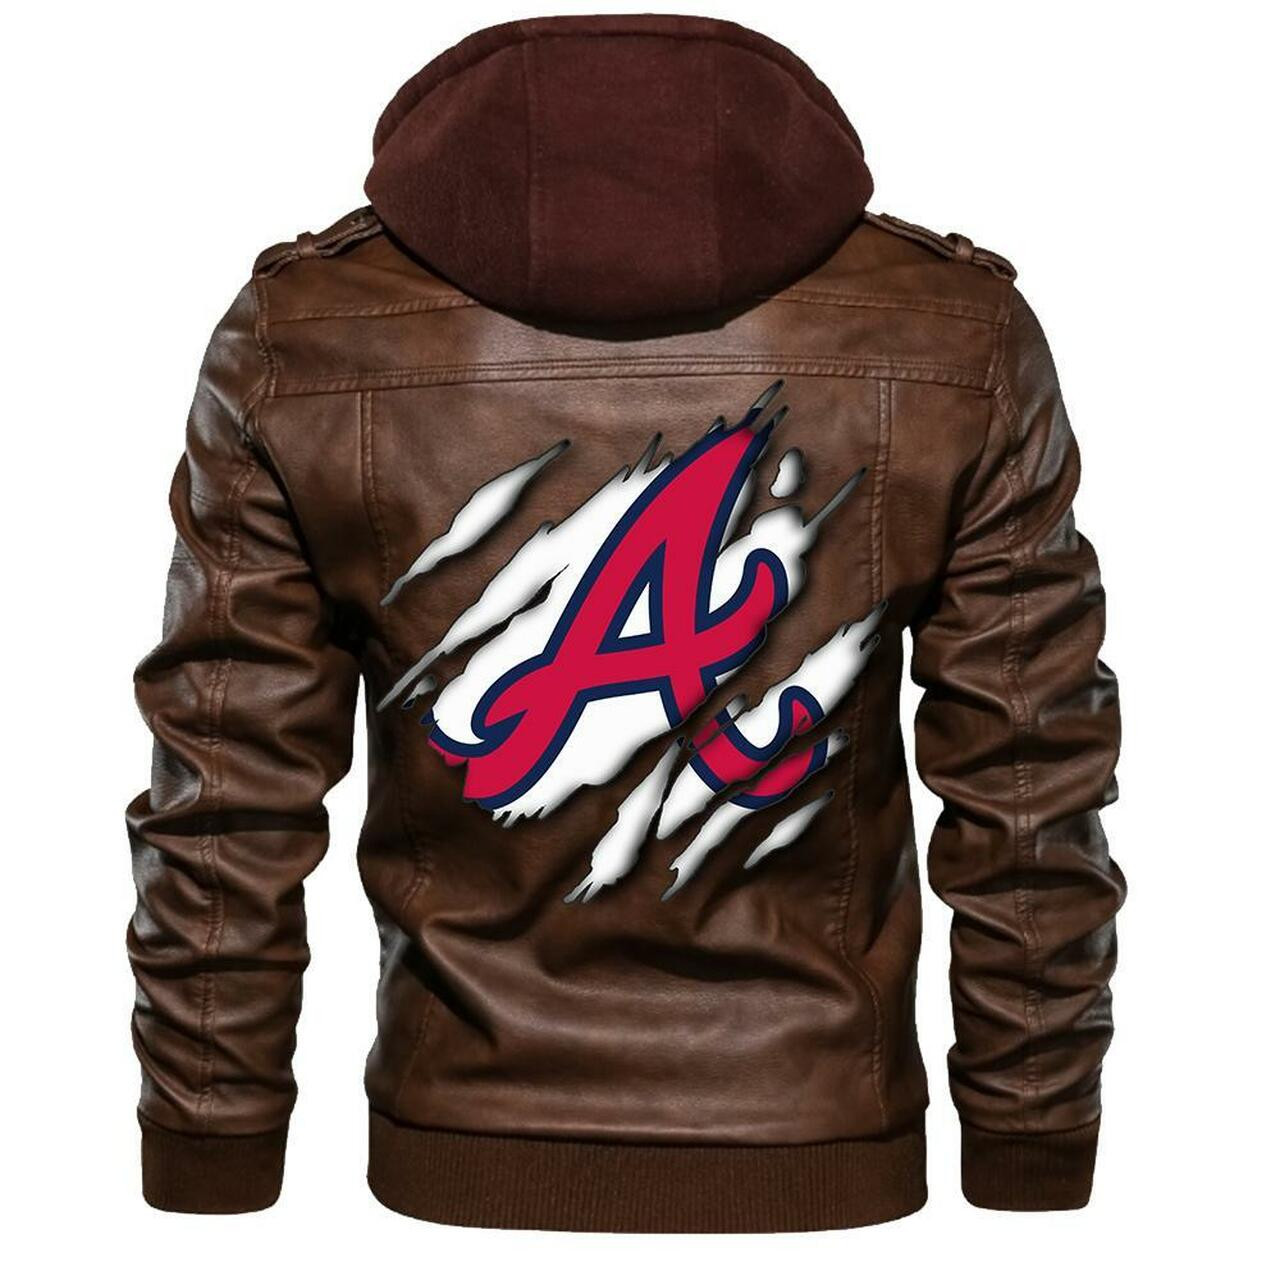 Top leather jackets are the perfect choice for the active man. 445